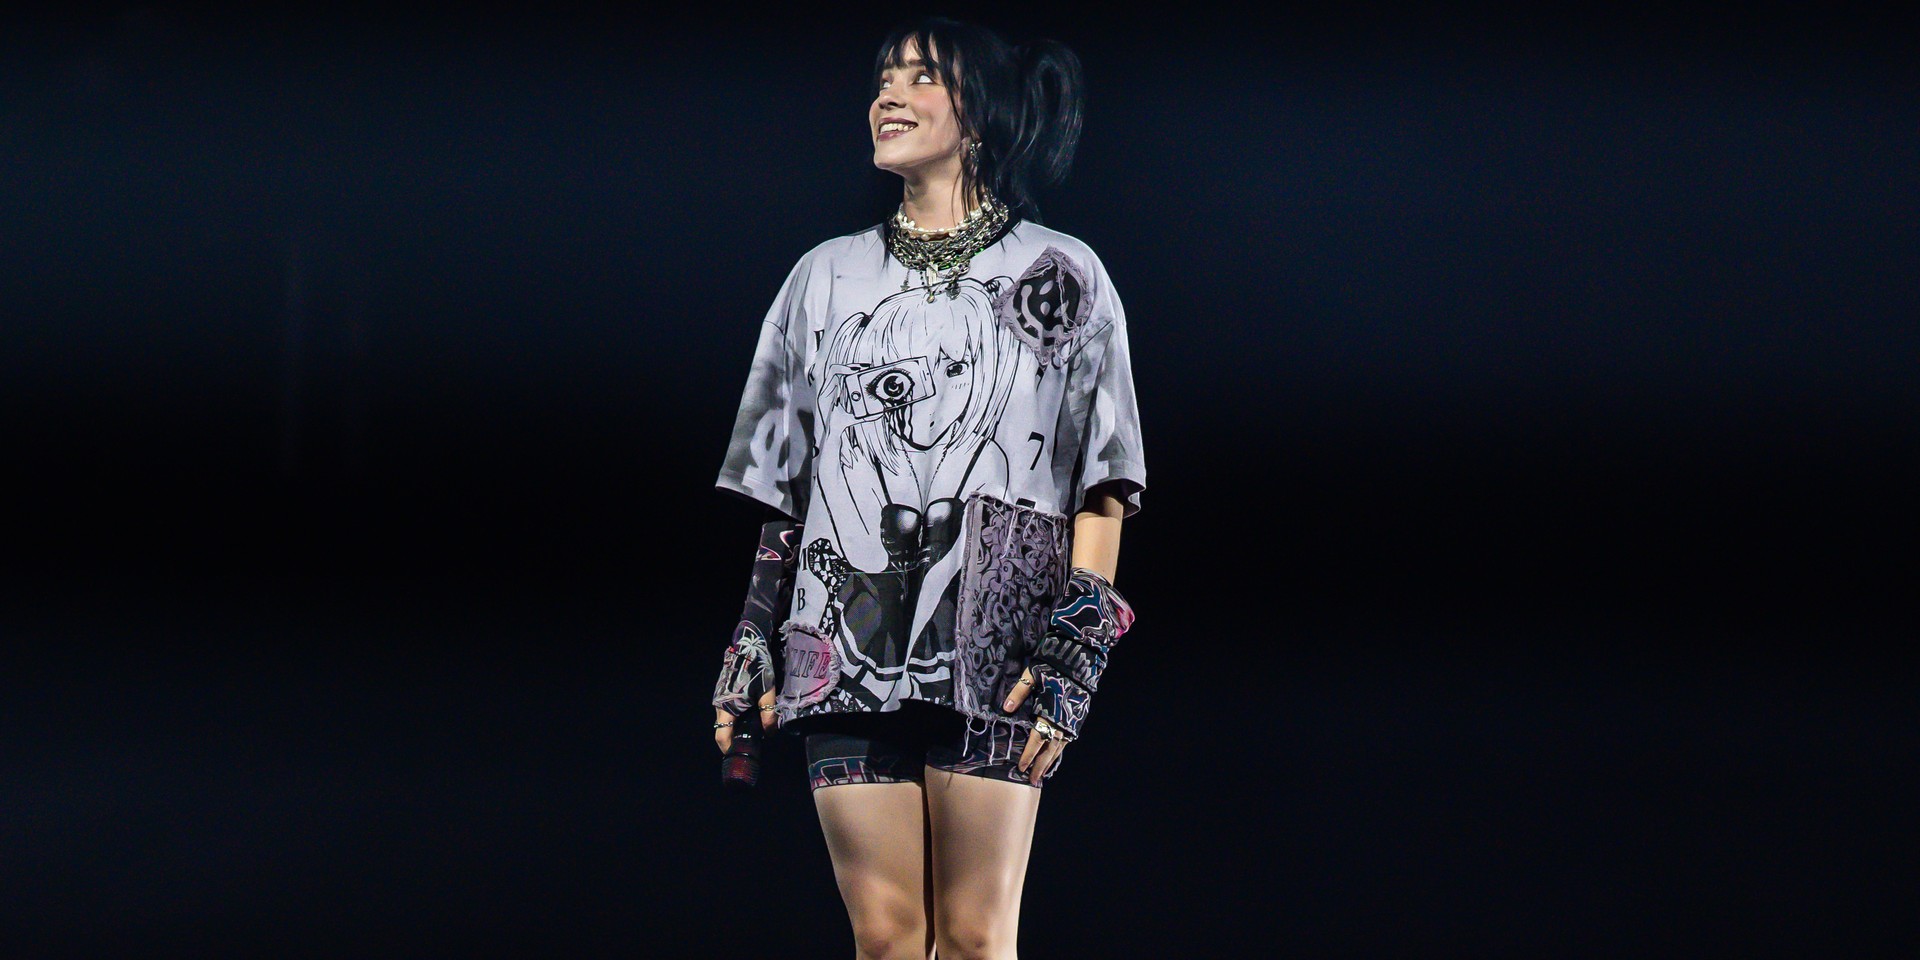 Billie Eilish exudes love and confidence at Manila stop of Happier Than Ever tour – gig report